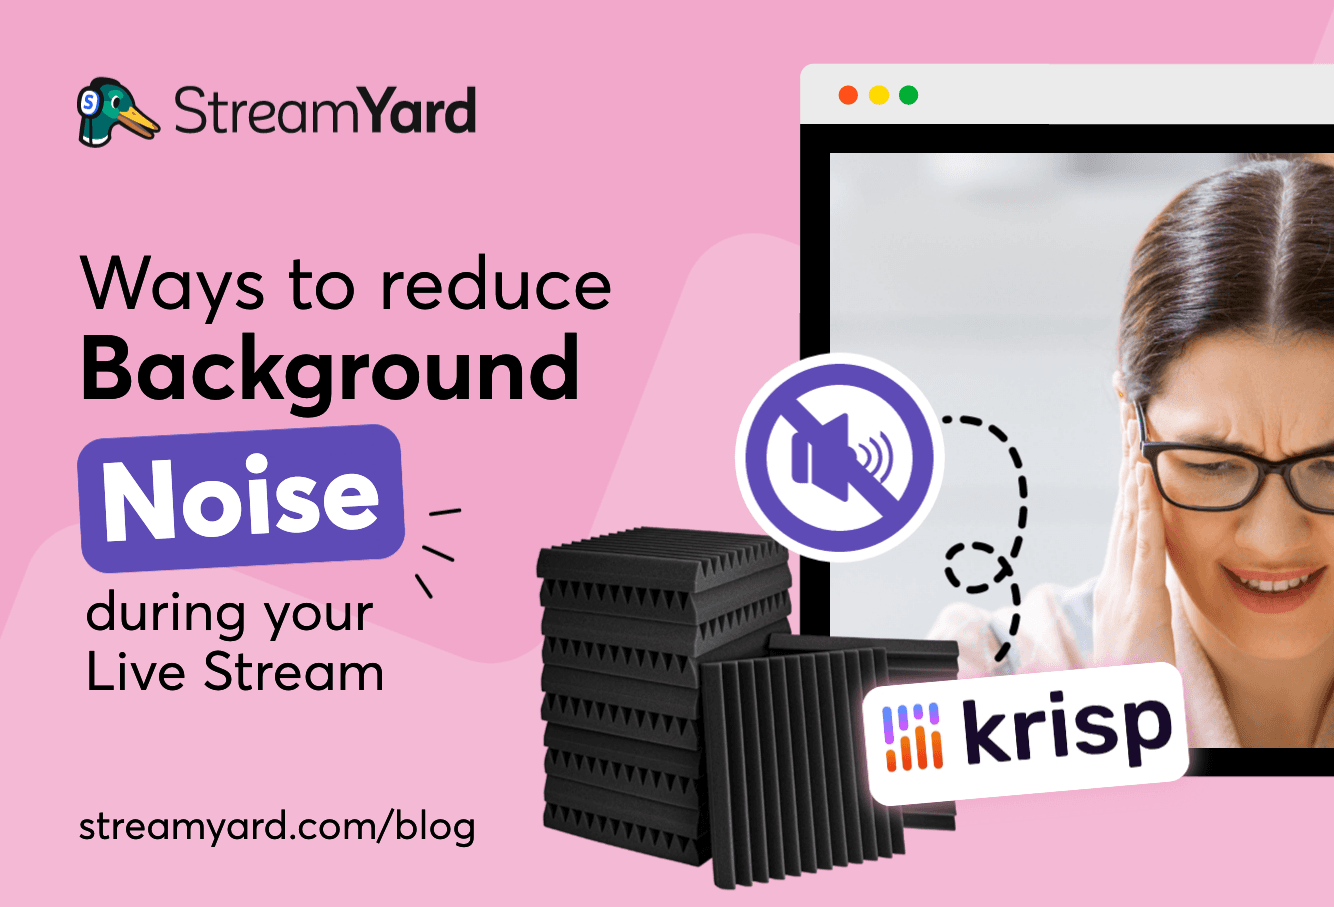 Learn about different ways to reduce live stream background noise so viewers have a great experience, don't get distracted, and can hear you better.